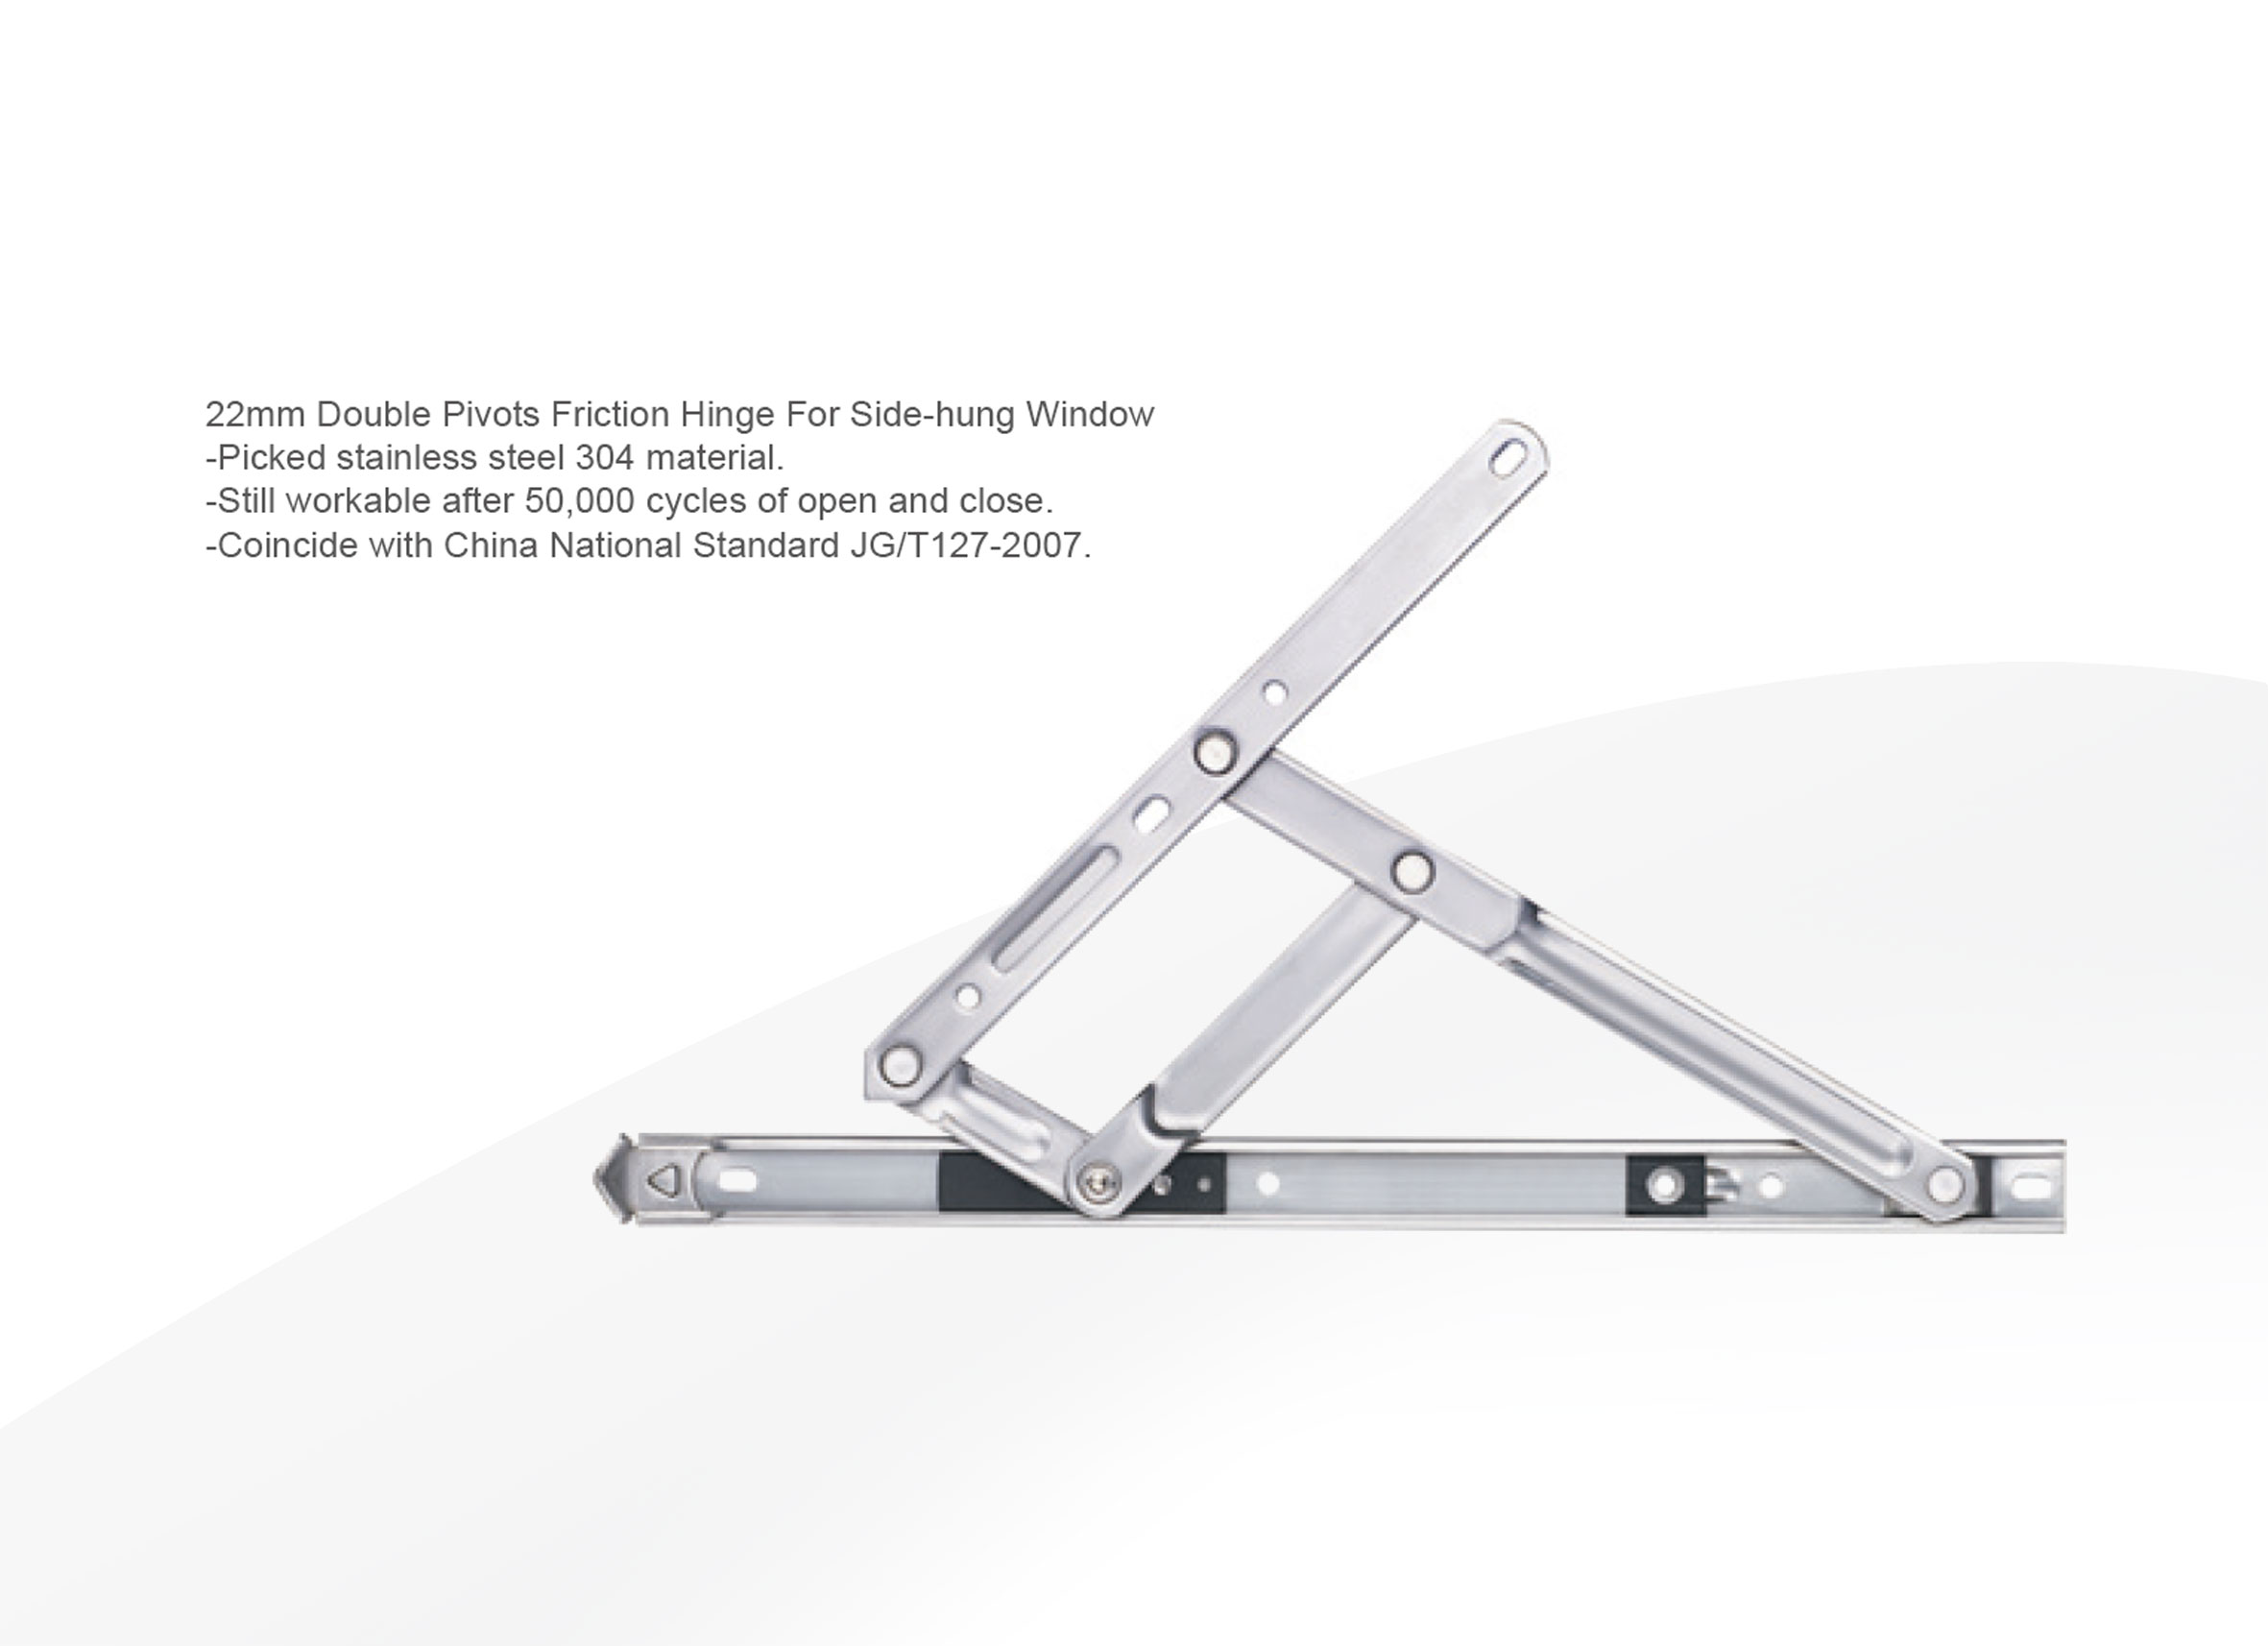 22mm Double Pivots Friction Hinge For Side-hung Window